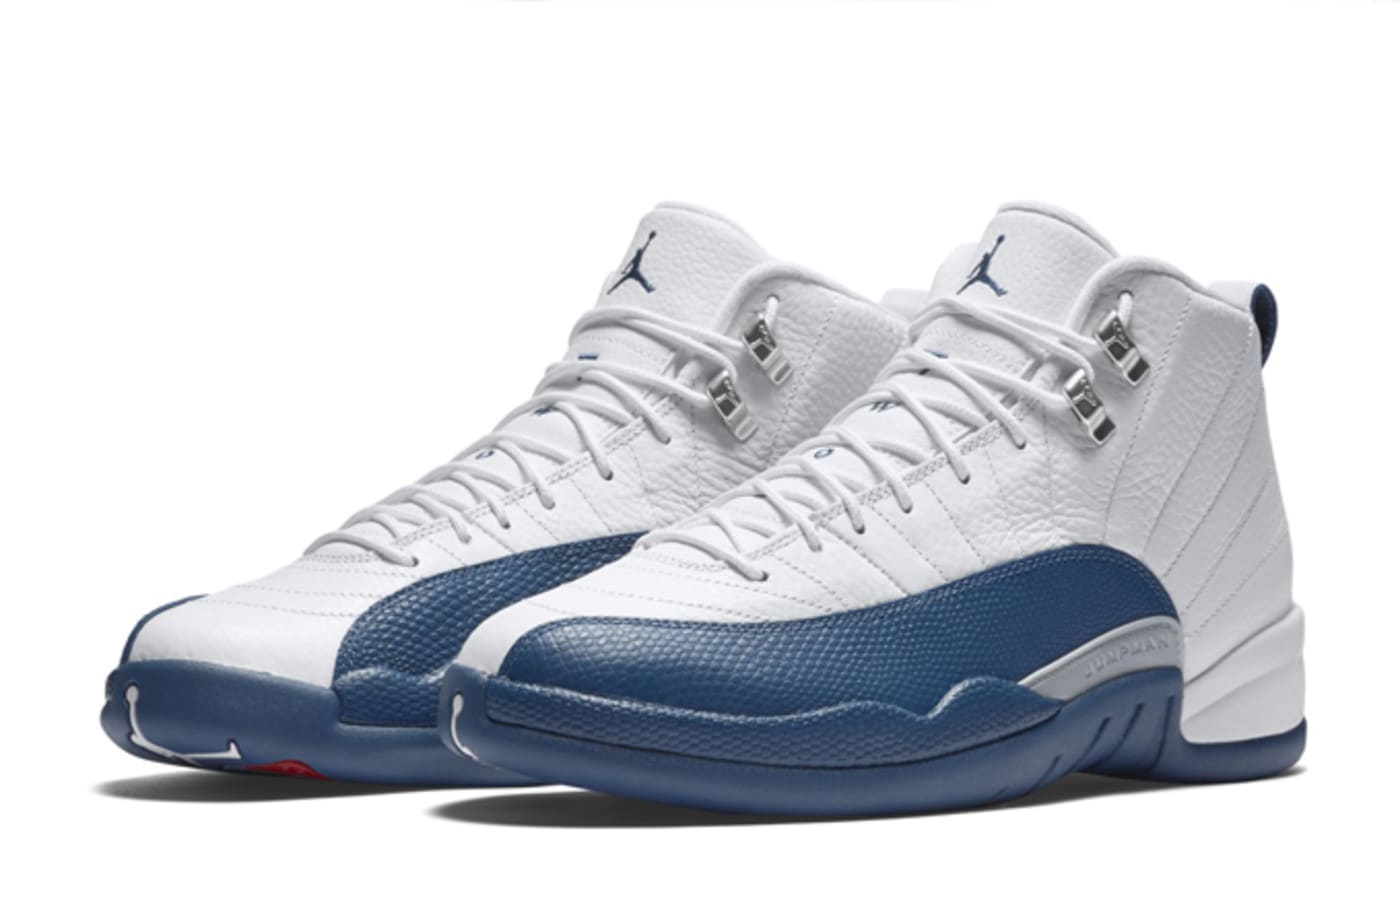 Air Jordan XII “French Blue” Official 